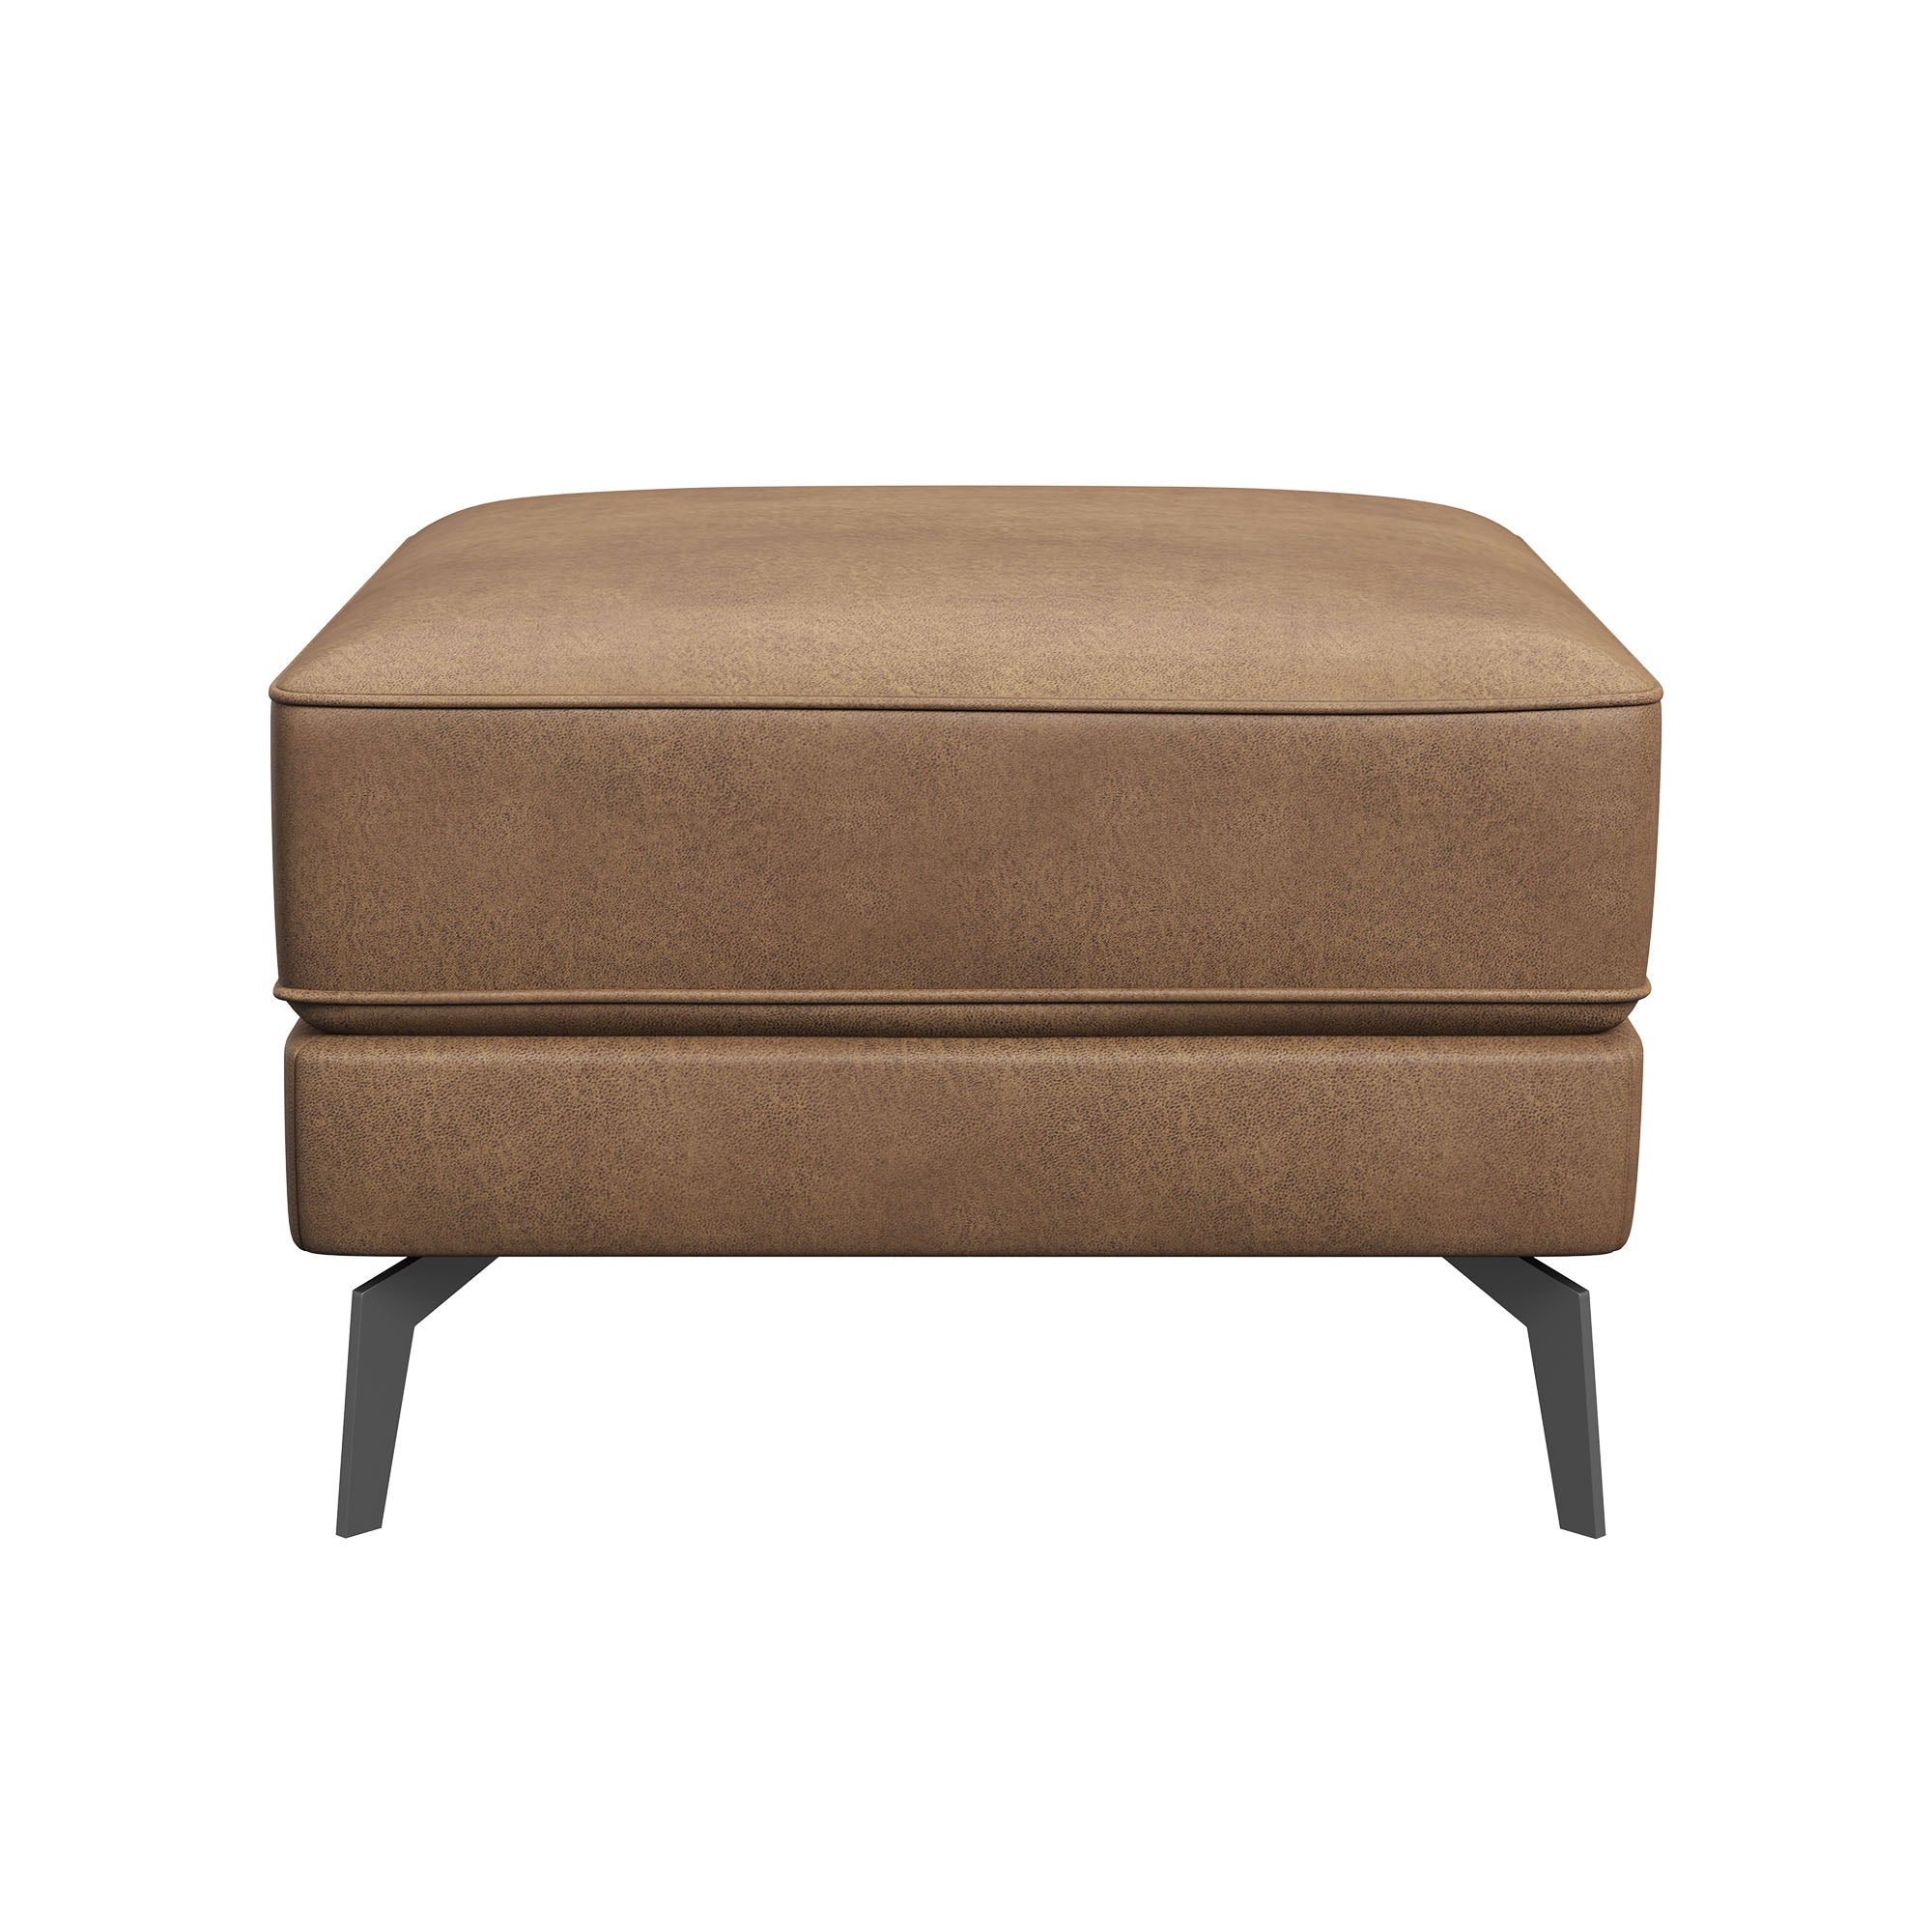 NOLANY Faux Square Ottoman for Armchair/Loveseat